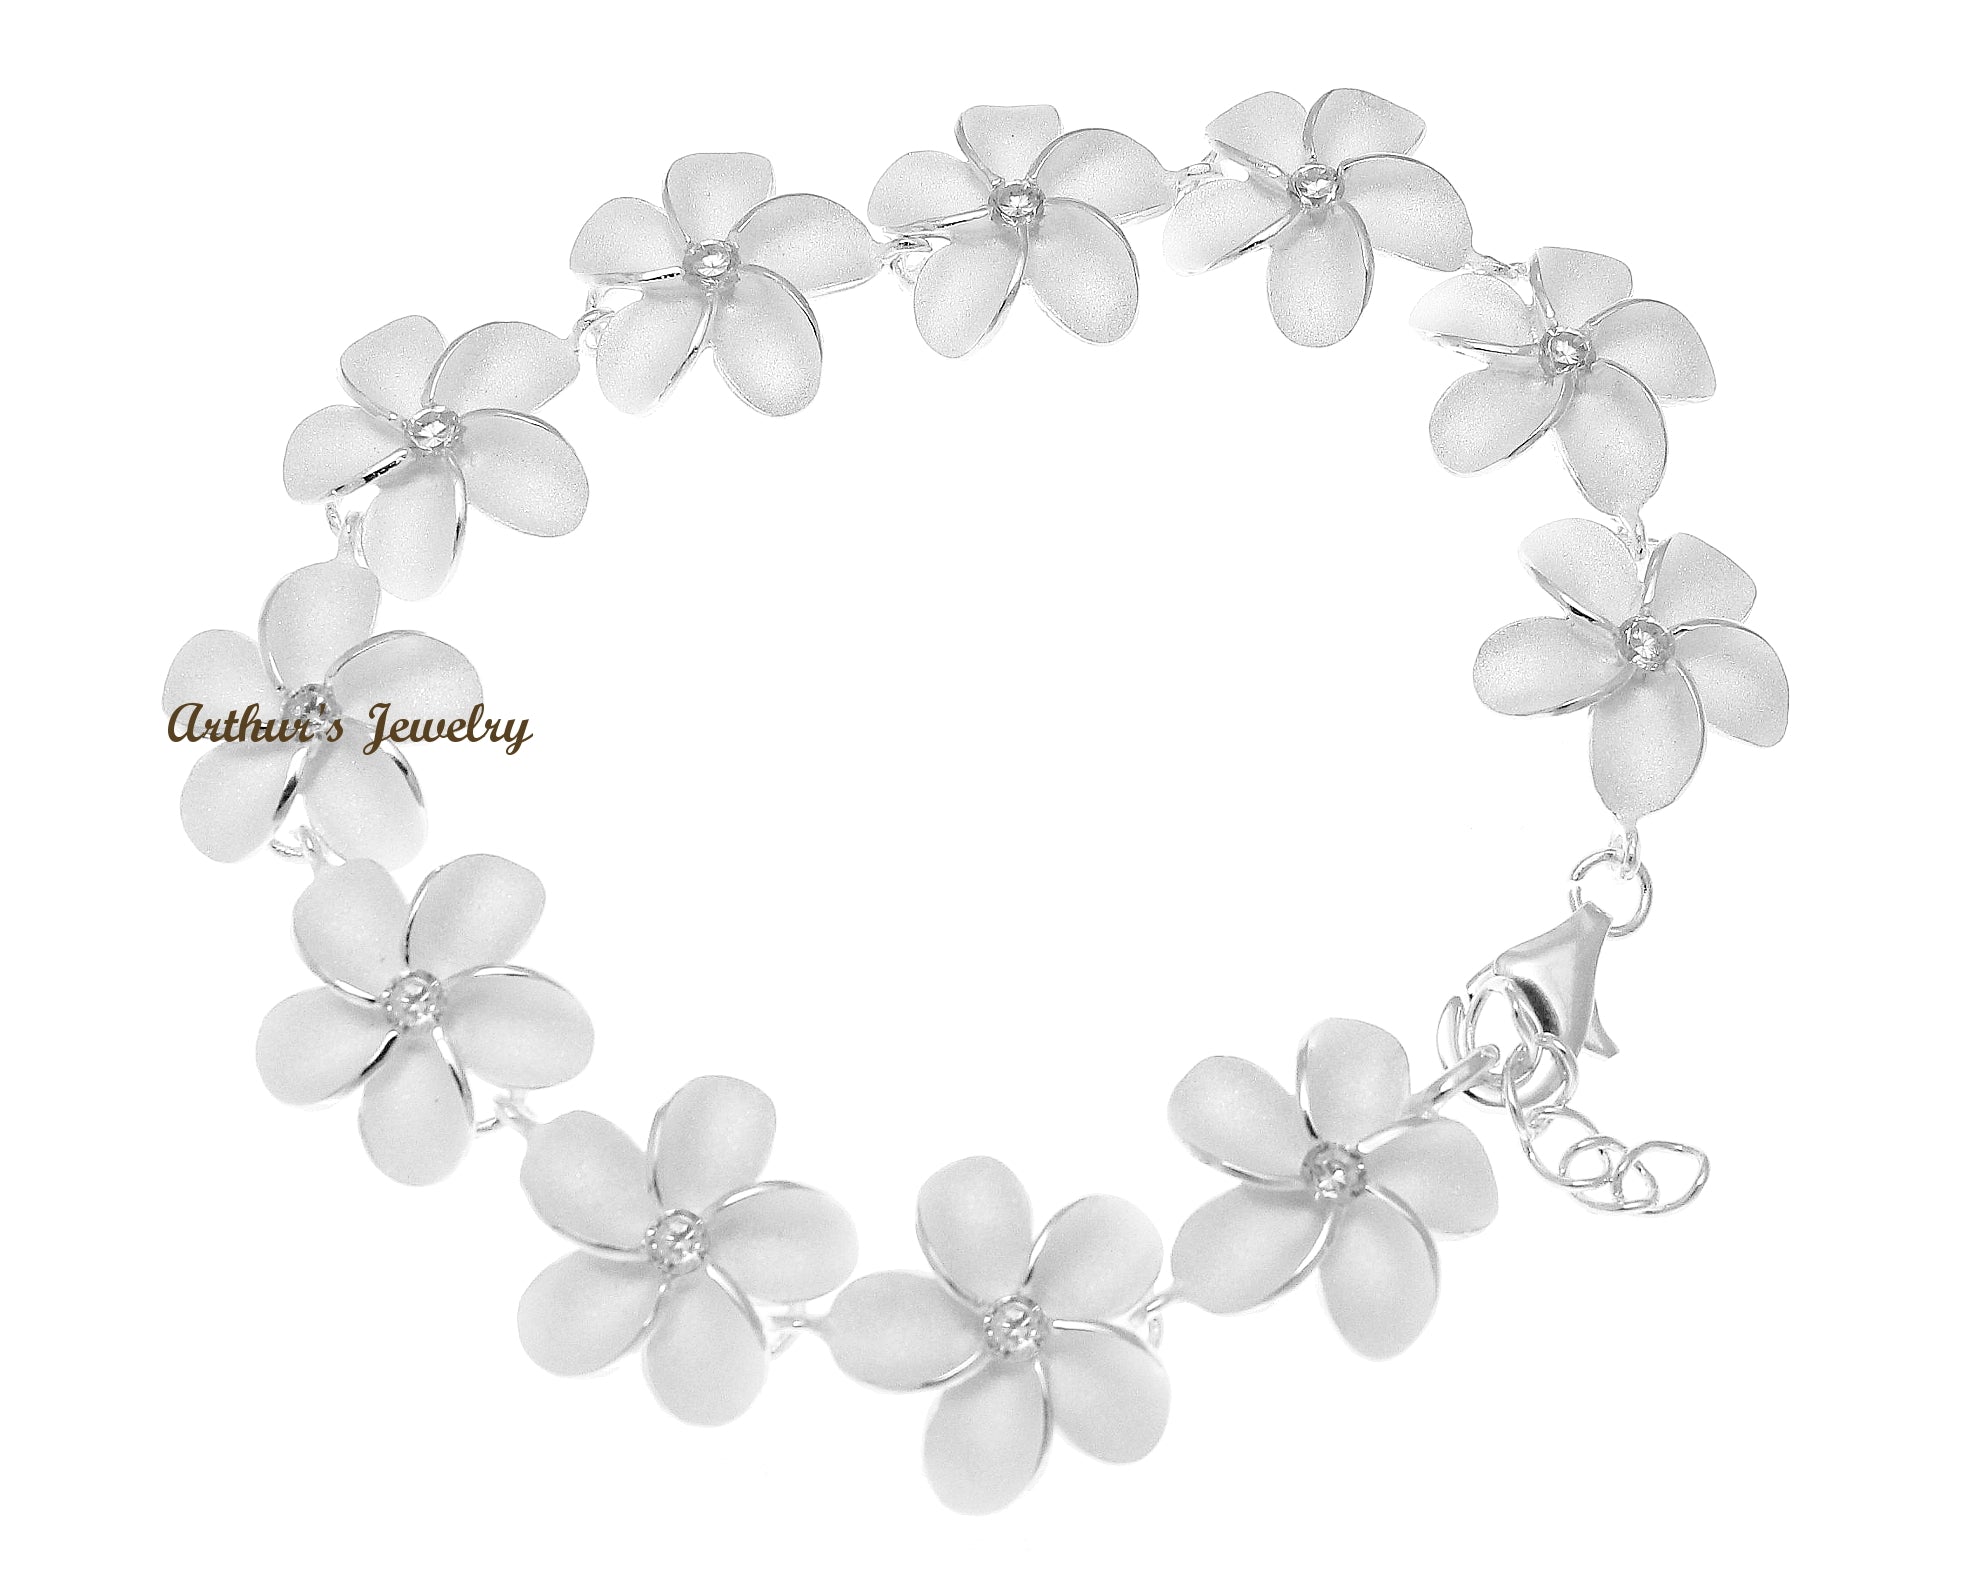 Hawaii Pink & White Fimo Plumeria Flower Elastic Bracelet with Inlaid CZ  Stones from Maui, Hawaii